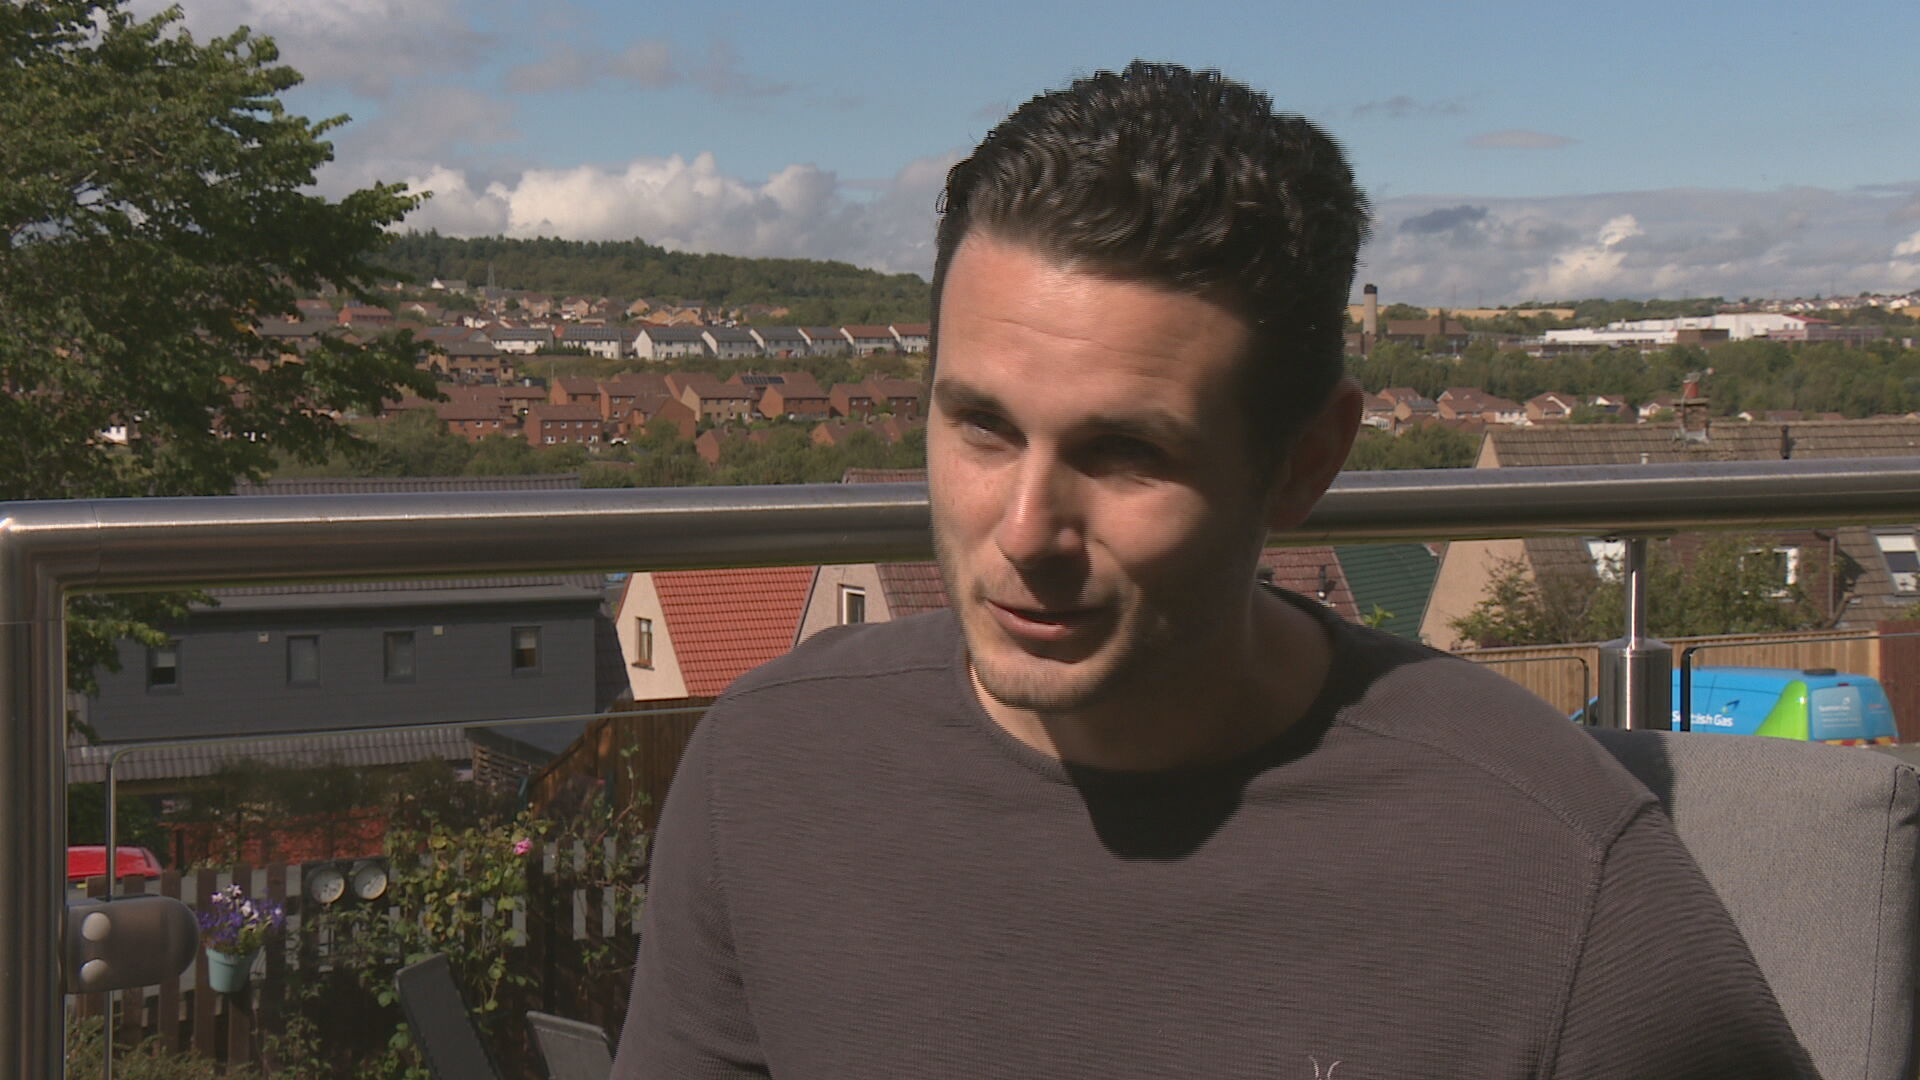 Lewis took a permanent job offer in Luxembourg after spending years on supply lists in Fife. 